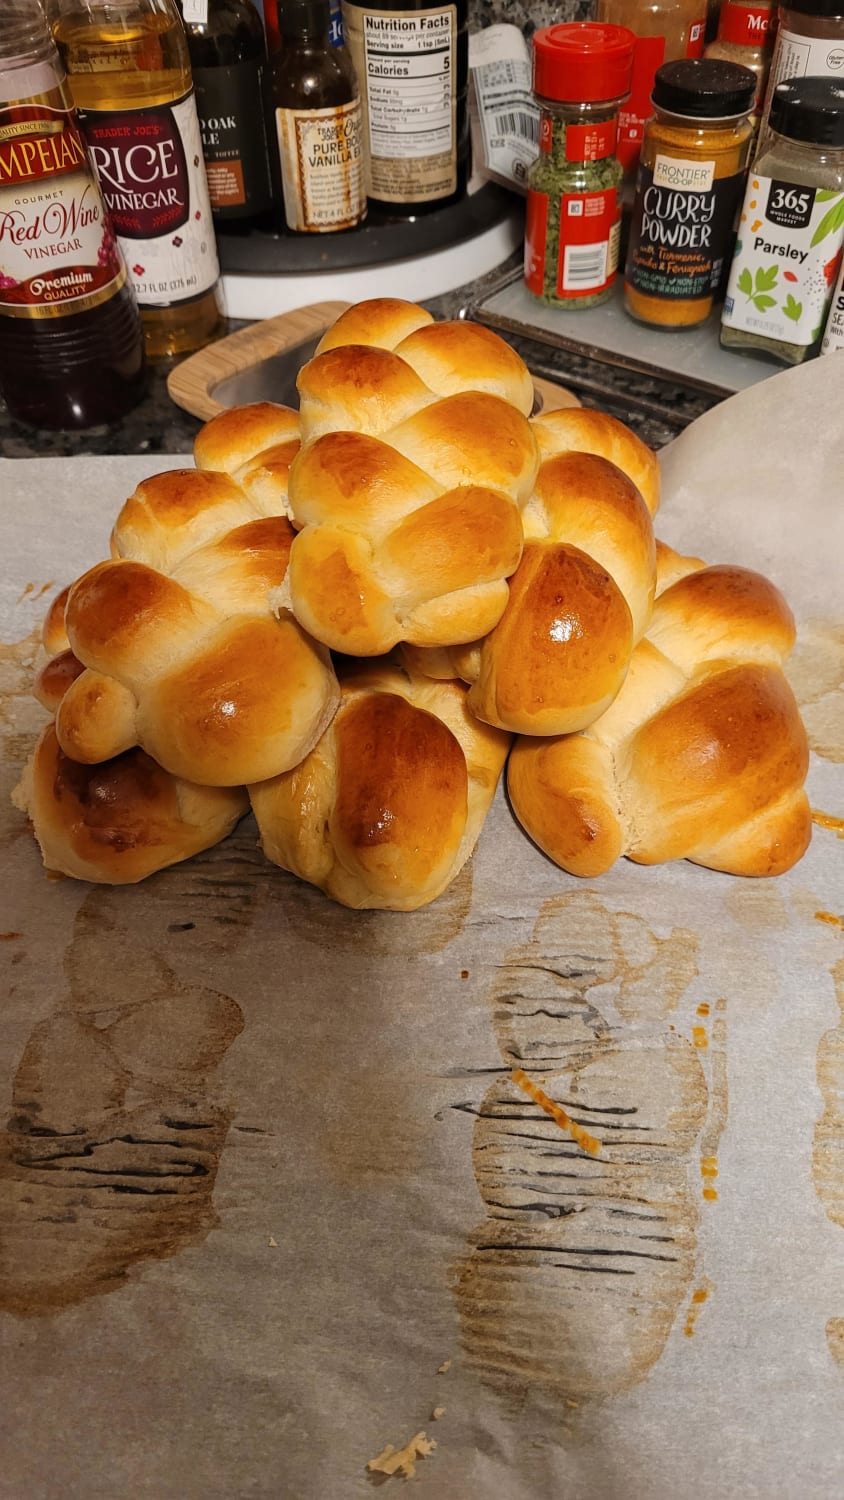 Wife doesn't think her mini challah pyramid is anything special. I disagree.